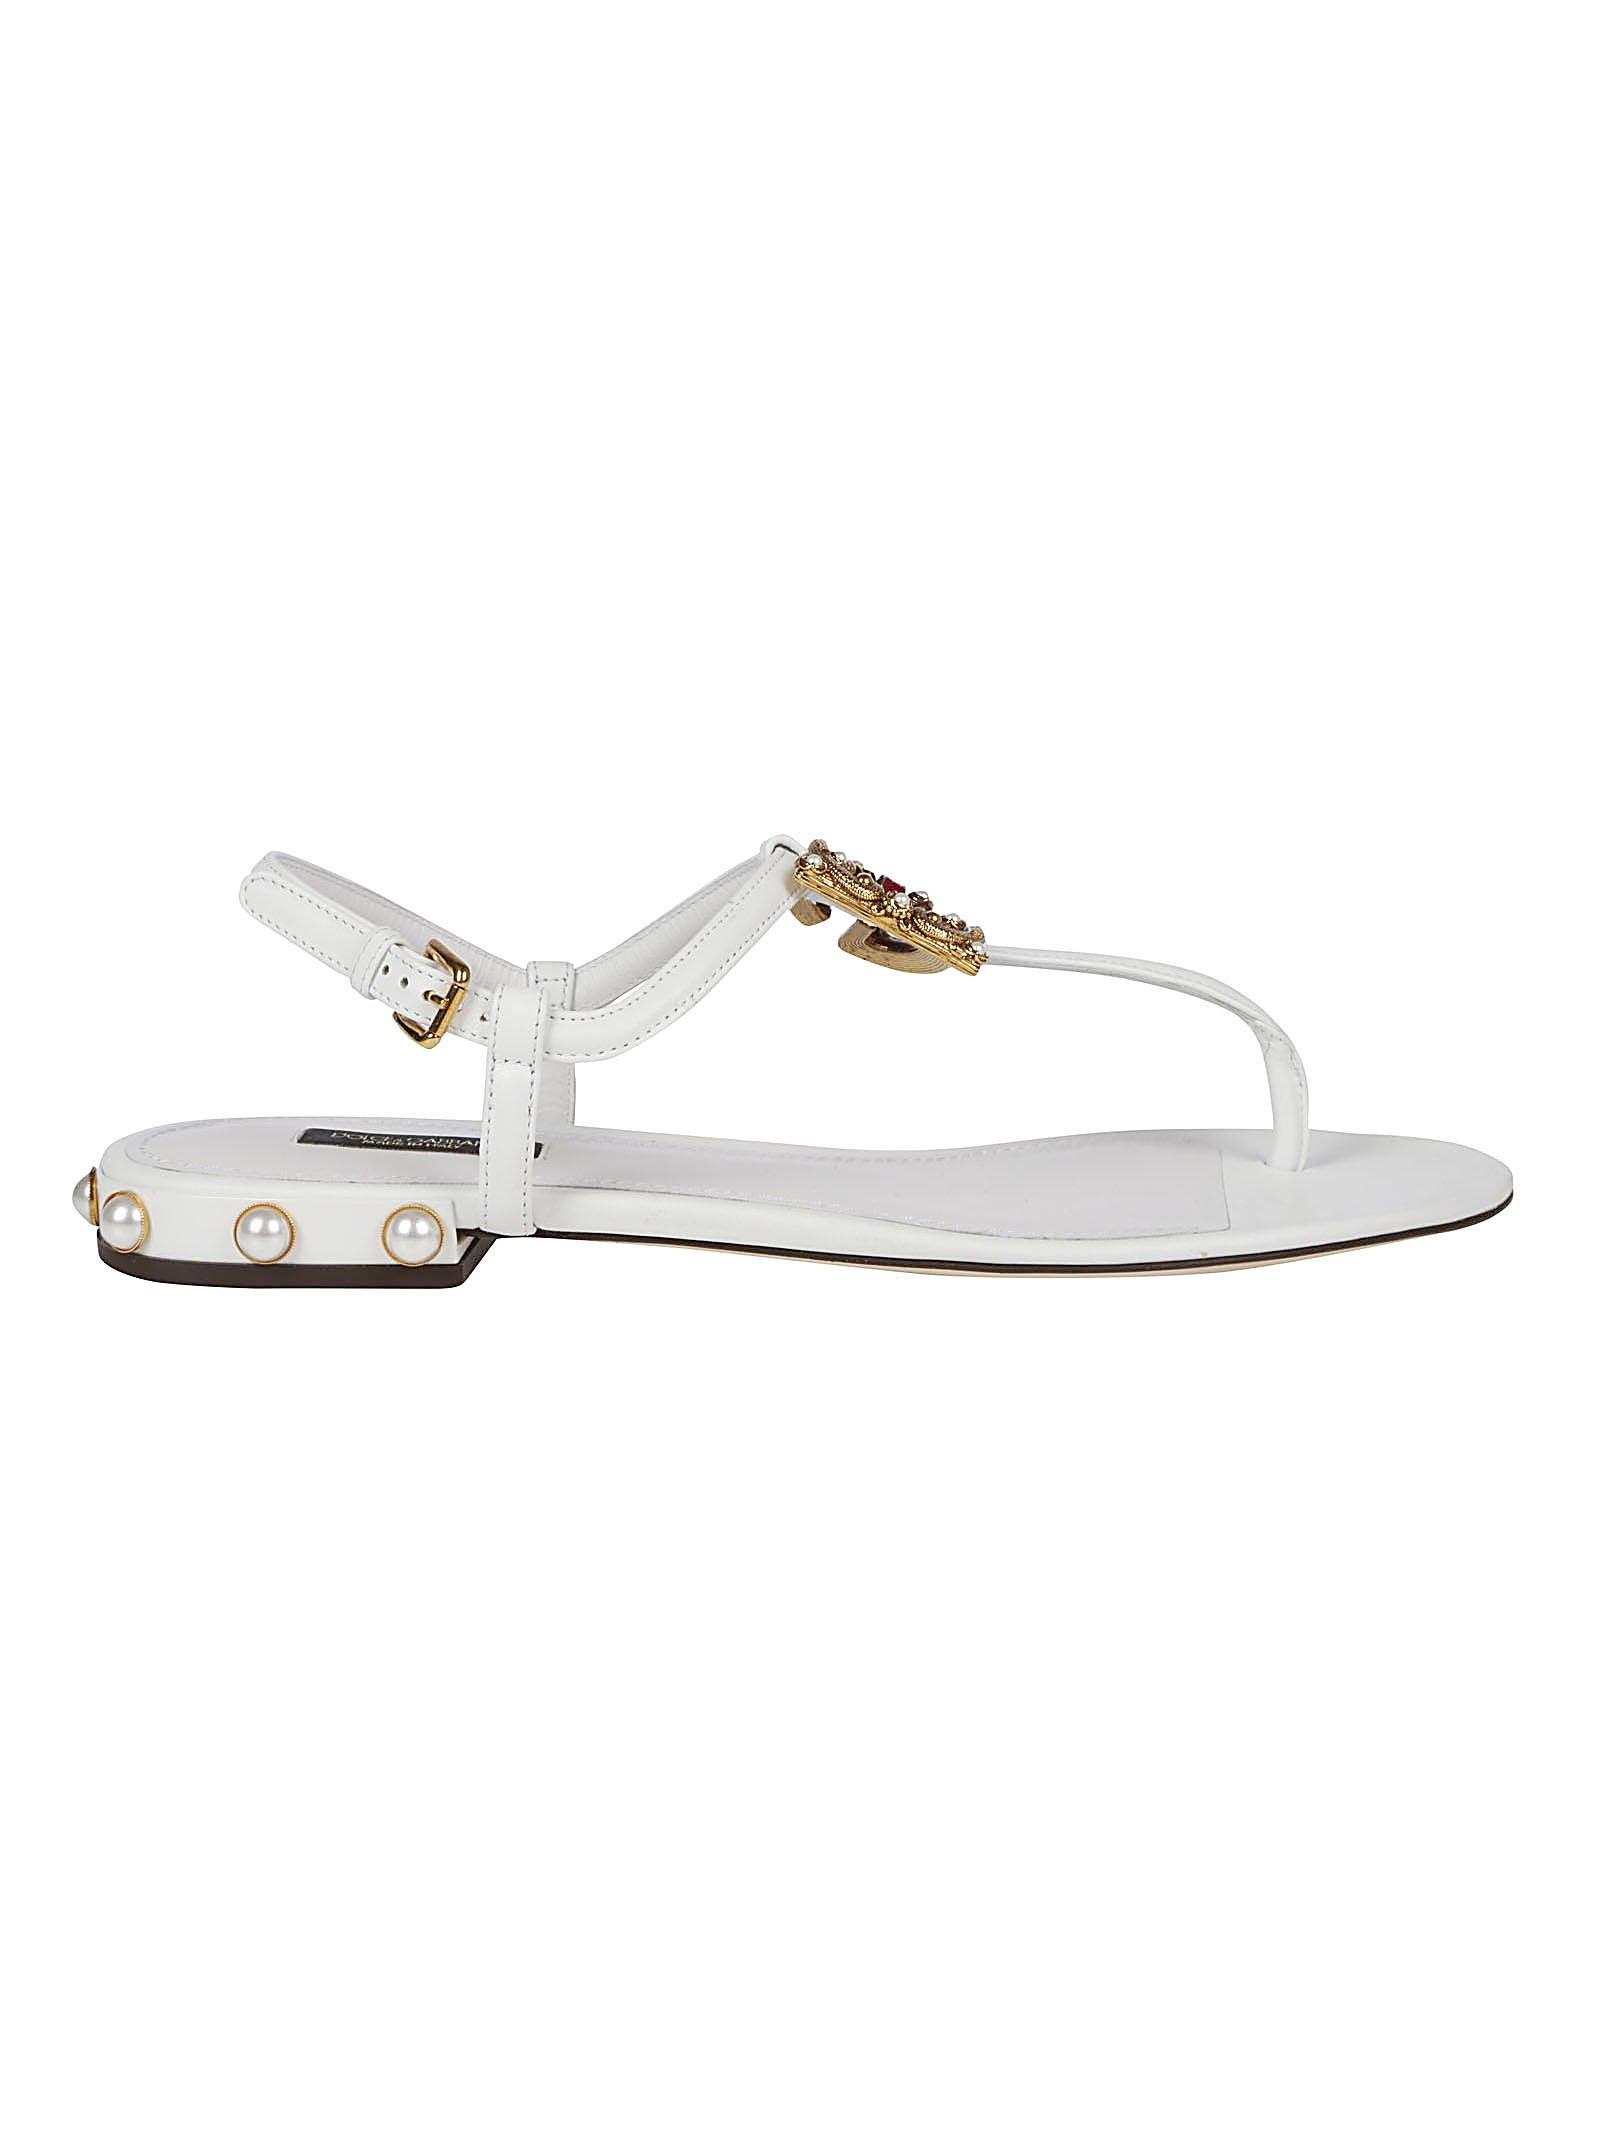 Dolce & Gabbana Leather Dg Amore Logo Sandals in White - Lyst